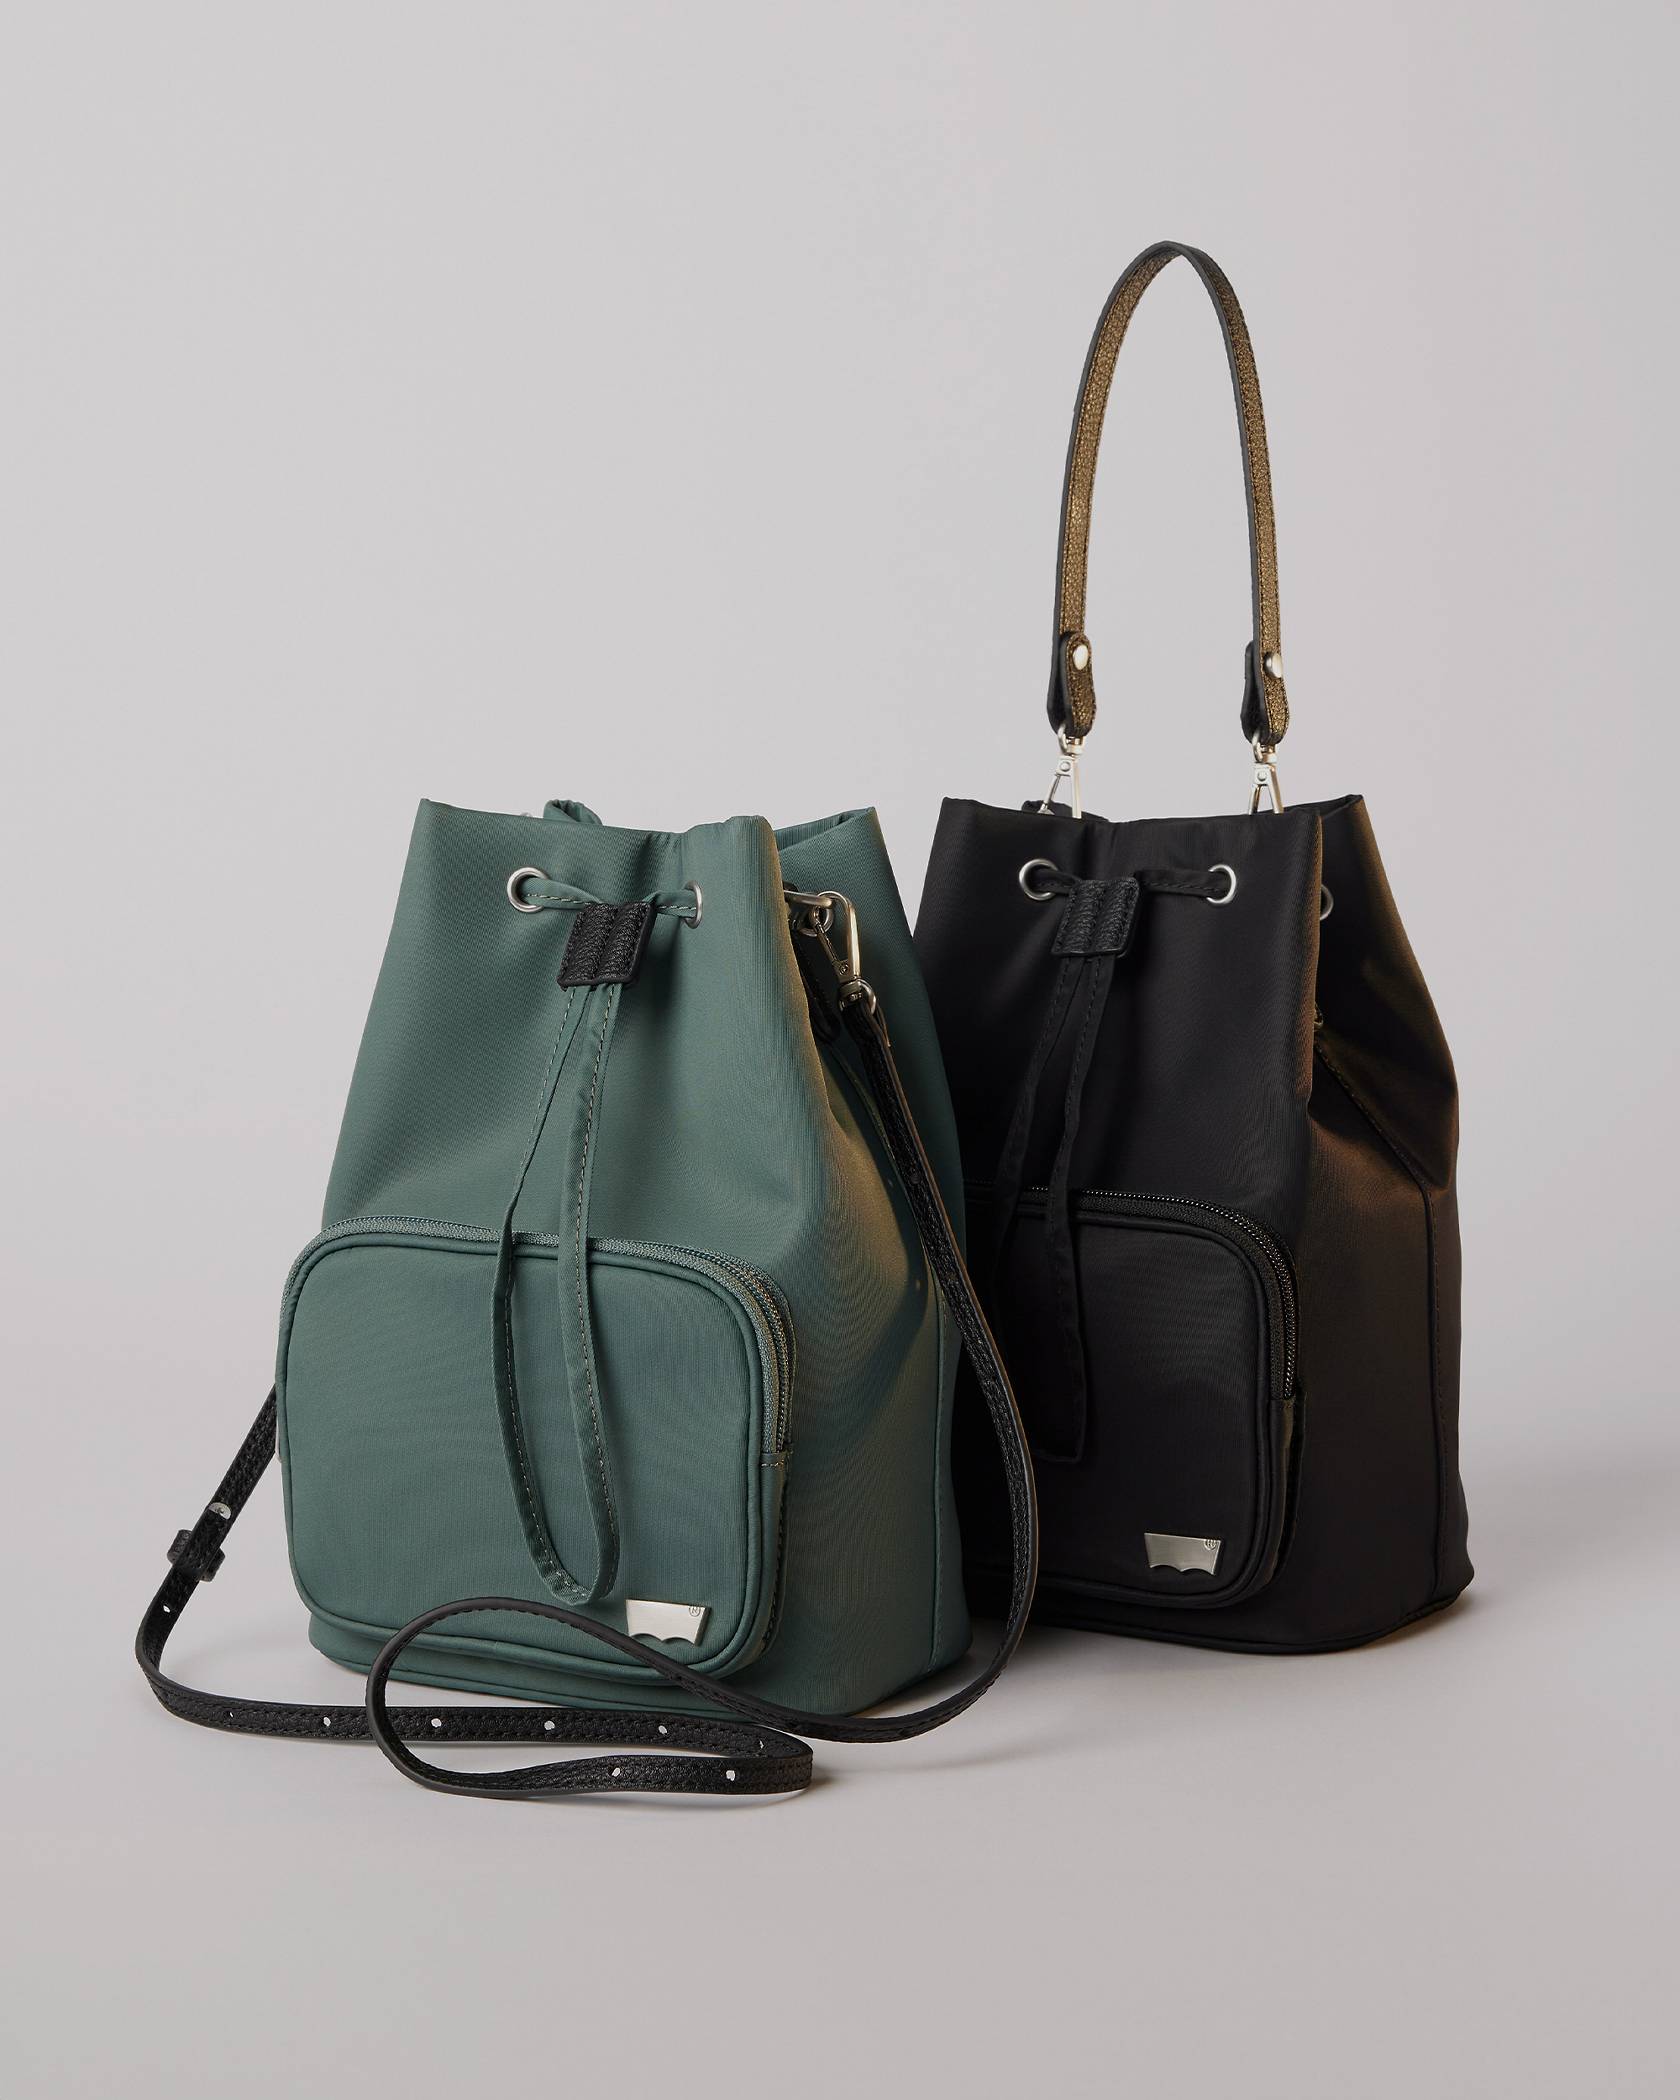 A green and a black bucket bag side by side